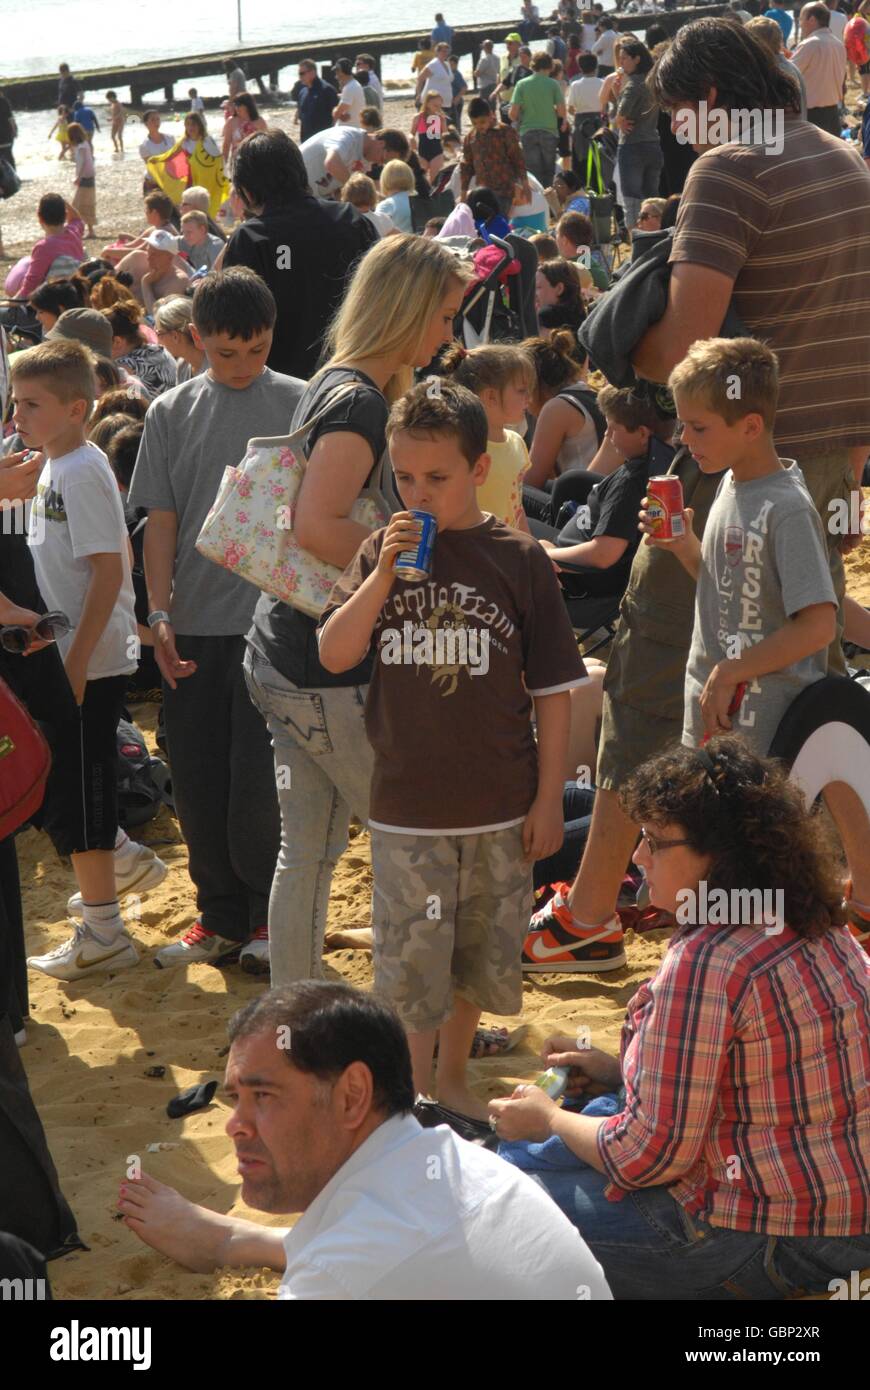 A boy (name not known) drinks from a can at Southend beach during the Southend Festival of the Air 09. The two day event regularly attracts over half a million people to the seafront over the weekend. Stock Photo